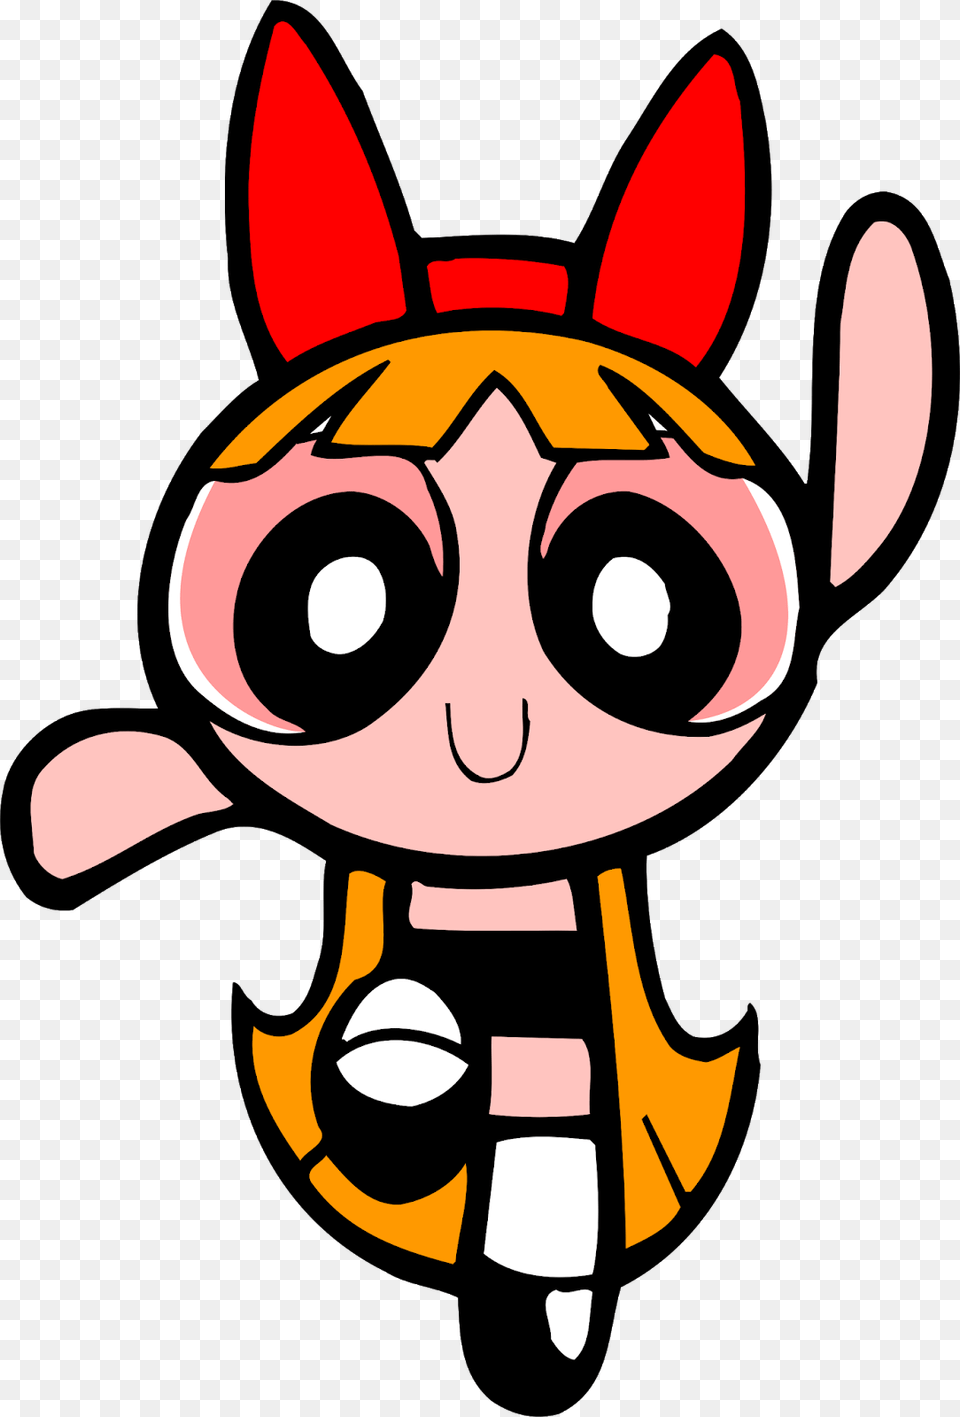 Powerpuff Girls Blossom Cartoon Powerpuff Girl Blossom Coloring Page, Baby, Person, Face, Head Png